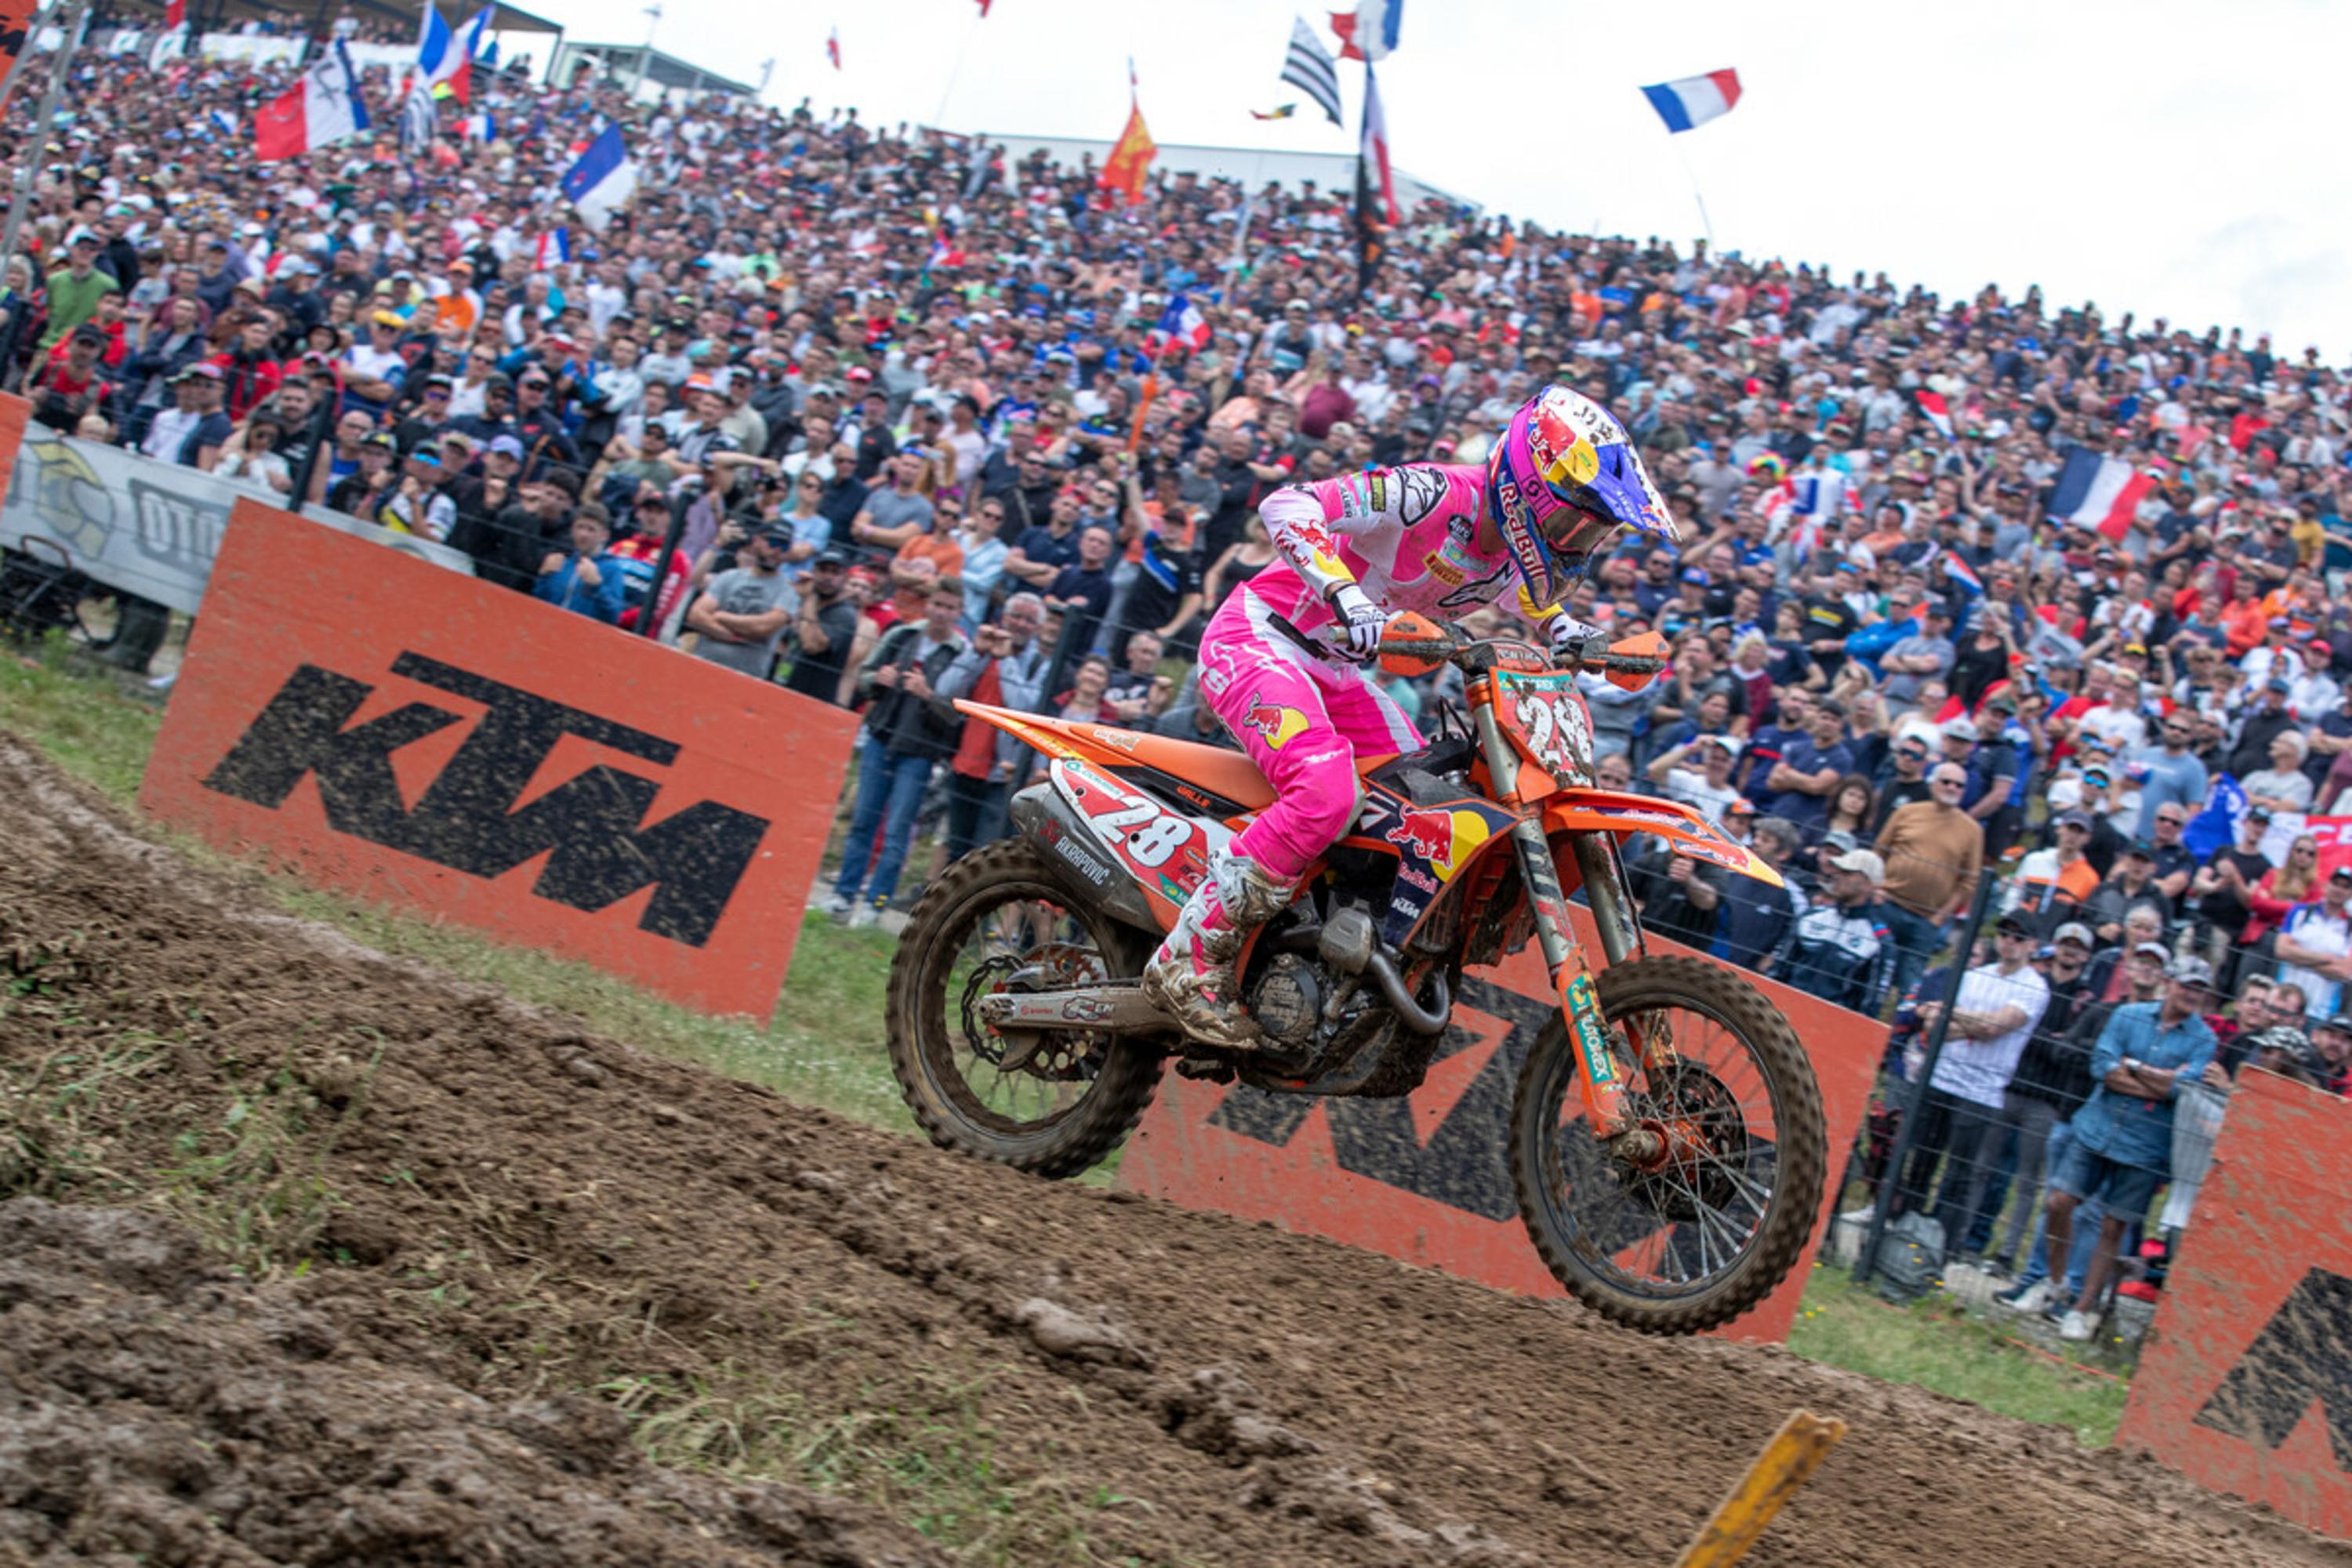 Vialle to Race in USA with KTM in 2023